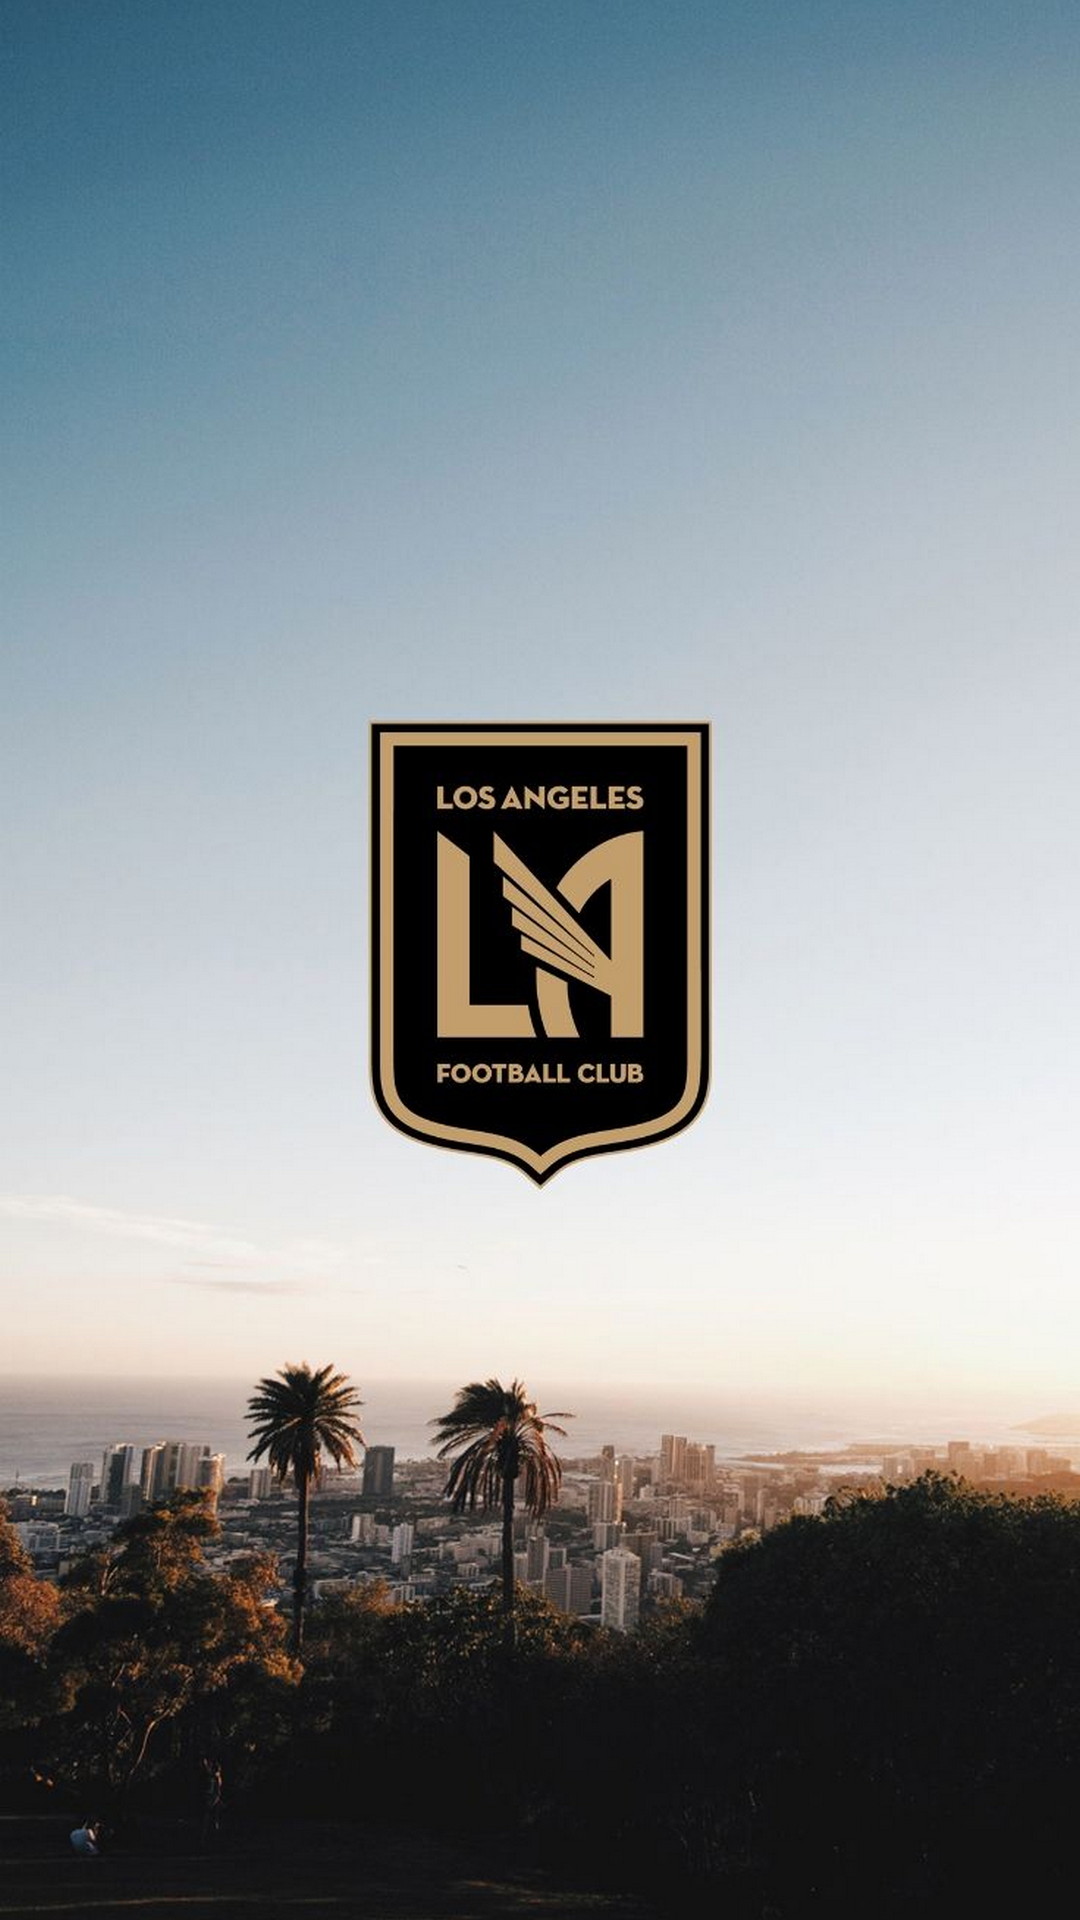 Los Angeles FC Wallpaper For Mobile with high-resolution 1080x1920 pixel. You can use this wallpaper for your Desktop Computers, Mac Screensavers, Windows Backgrounds, iPhone Wallpapers, Tablet or Android Lock screen and another Mobile device